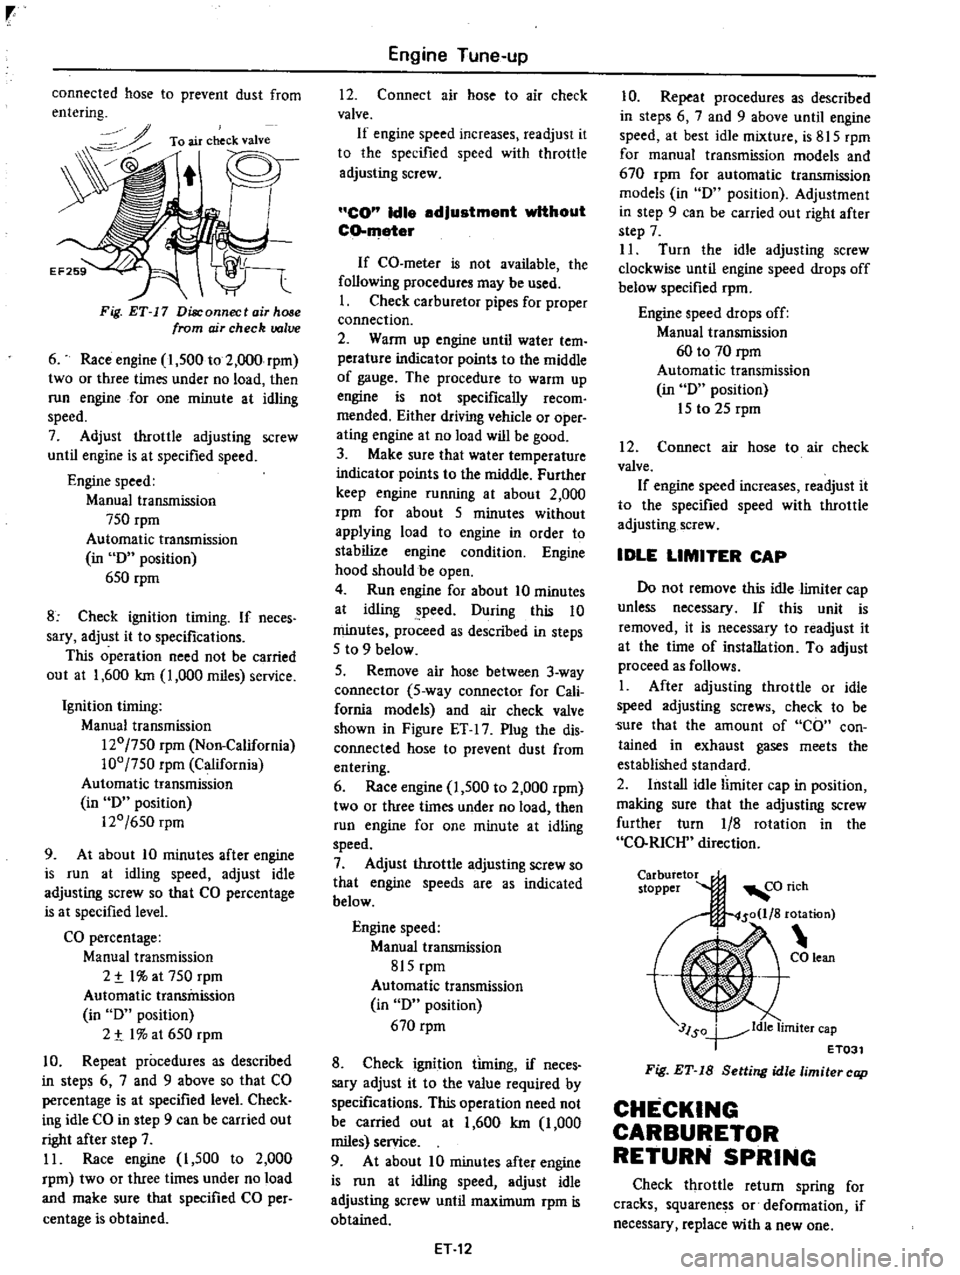 DATSUN PICK-UP 1977  Service Manual 
r

connected

hose

to

prevent 
dust

from

entering

To

air 
check

valve

Fig 
ET 
17 
Disconnect 
air 
hose

from 
ojr 
check 
valve

6

Race

engine 
1 
500 
to 
2 
000

rpm

two 
or 
three 
ti